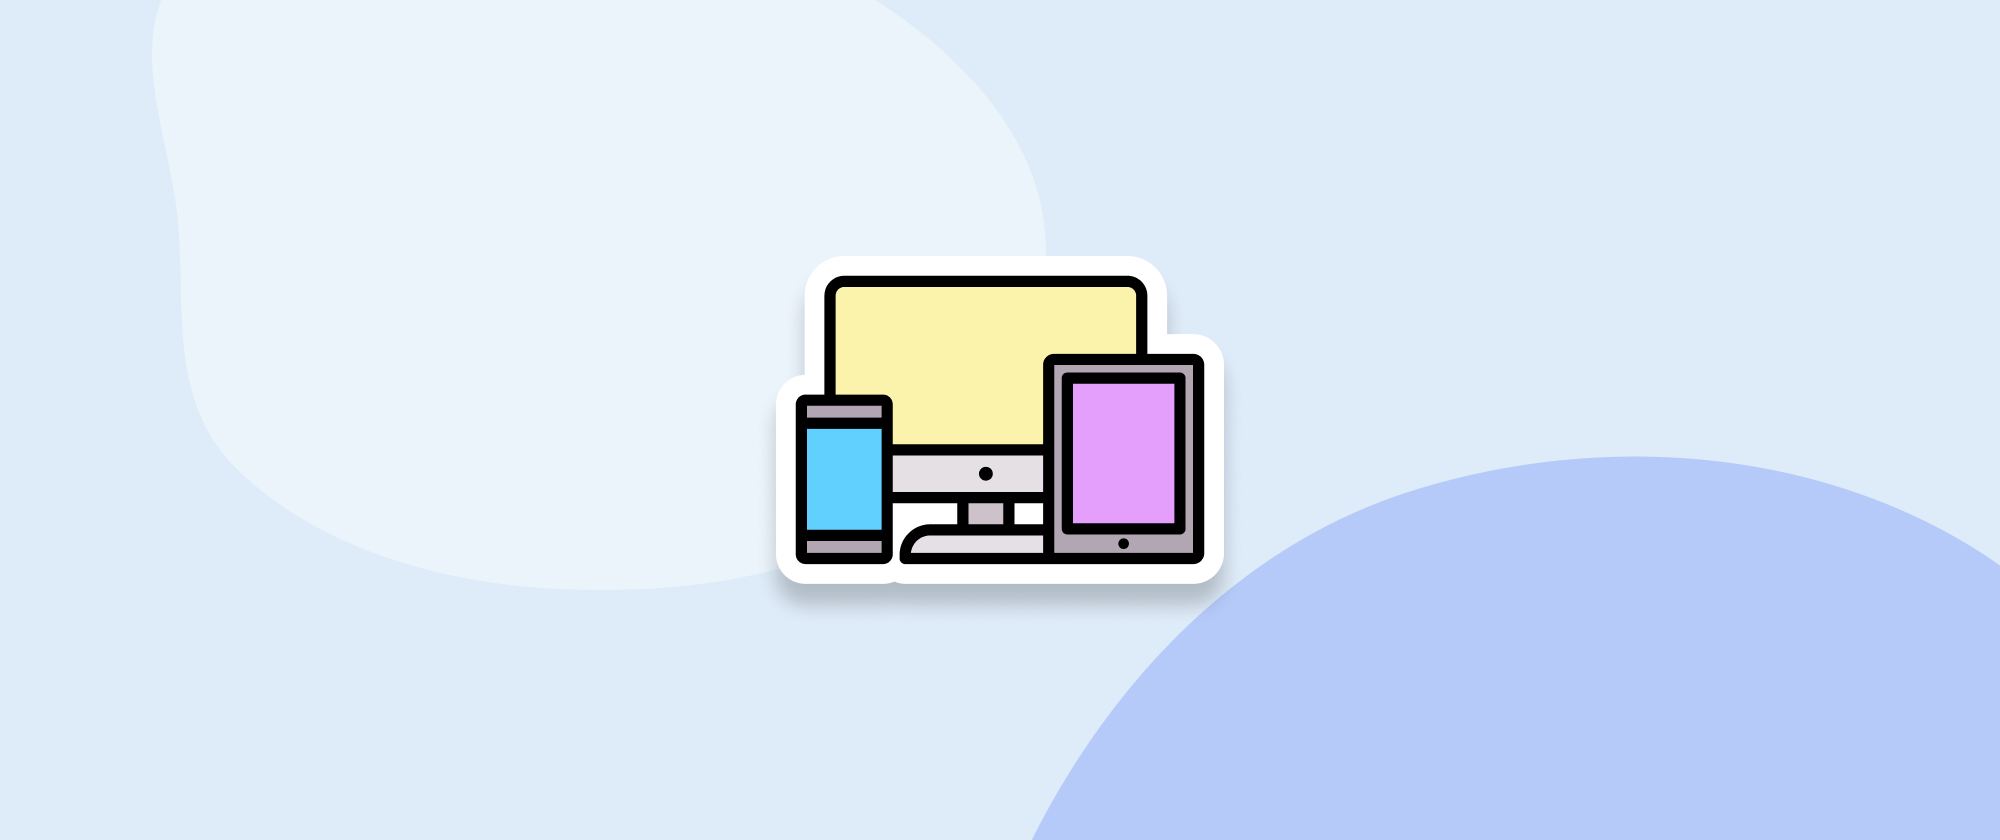 Learn to build responsive websites in our new course!